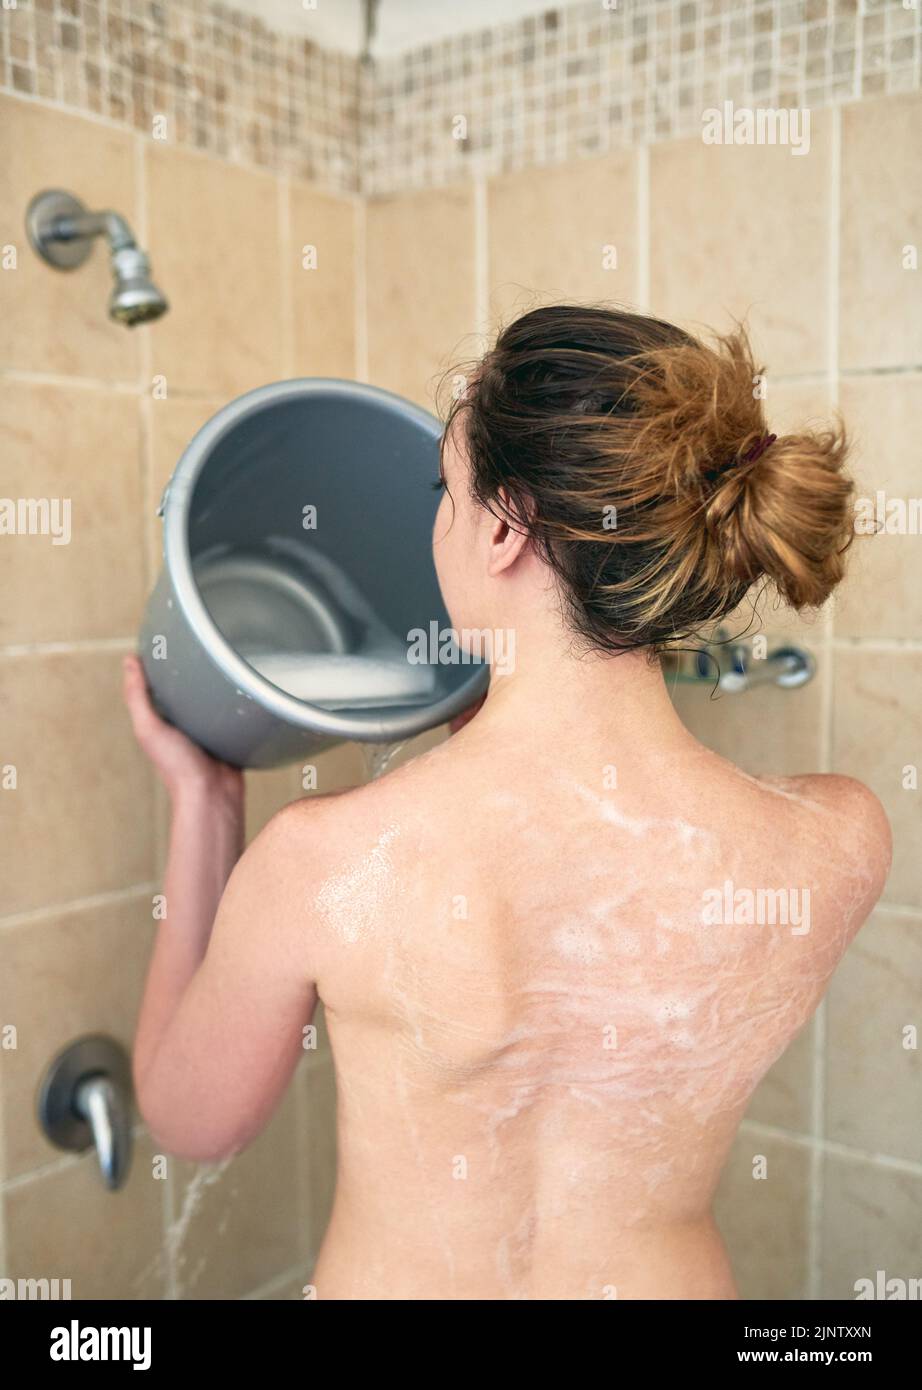 Save water, save money and save the planet. Rearview shot of an unrecognizable woman washing her body with a bucket of water in the bathroom at home. Stock Photo